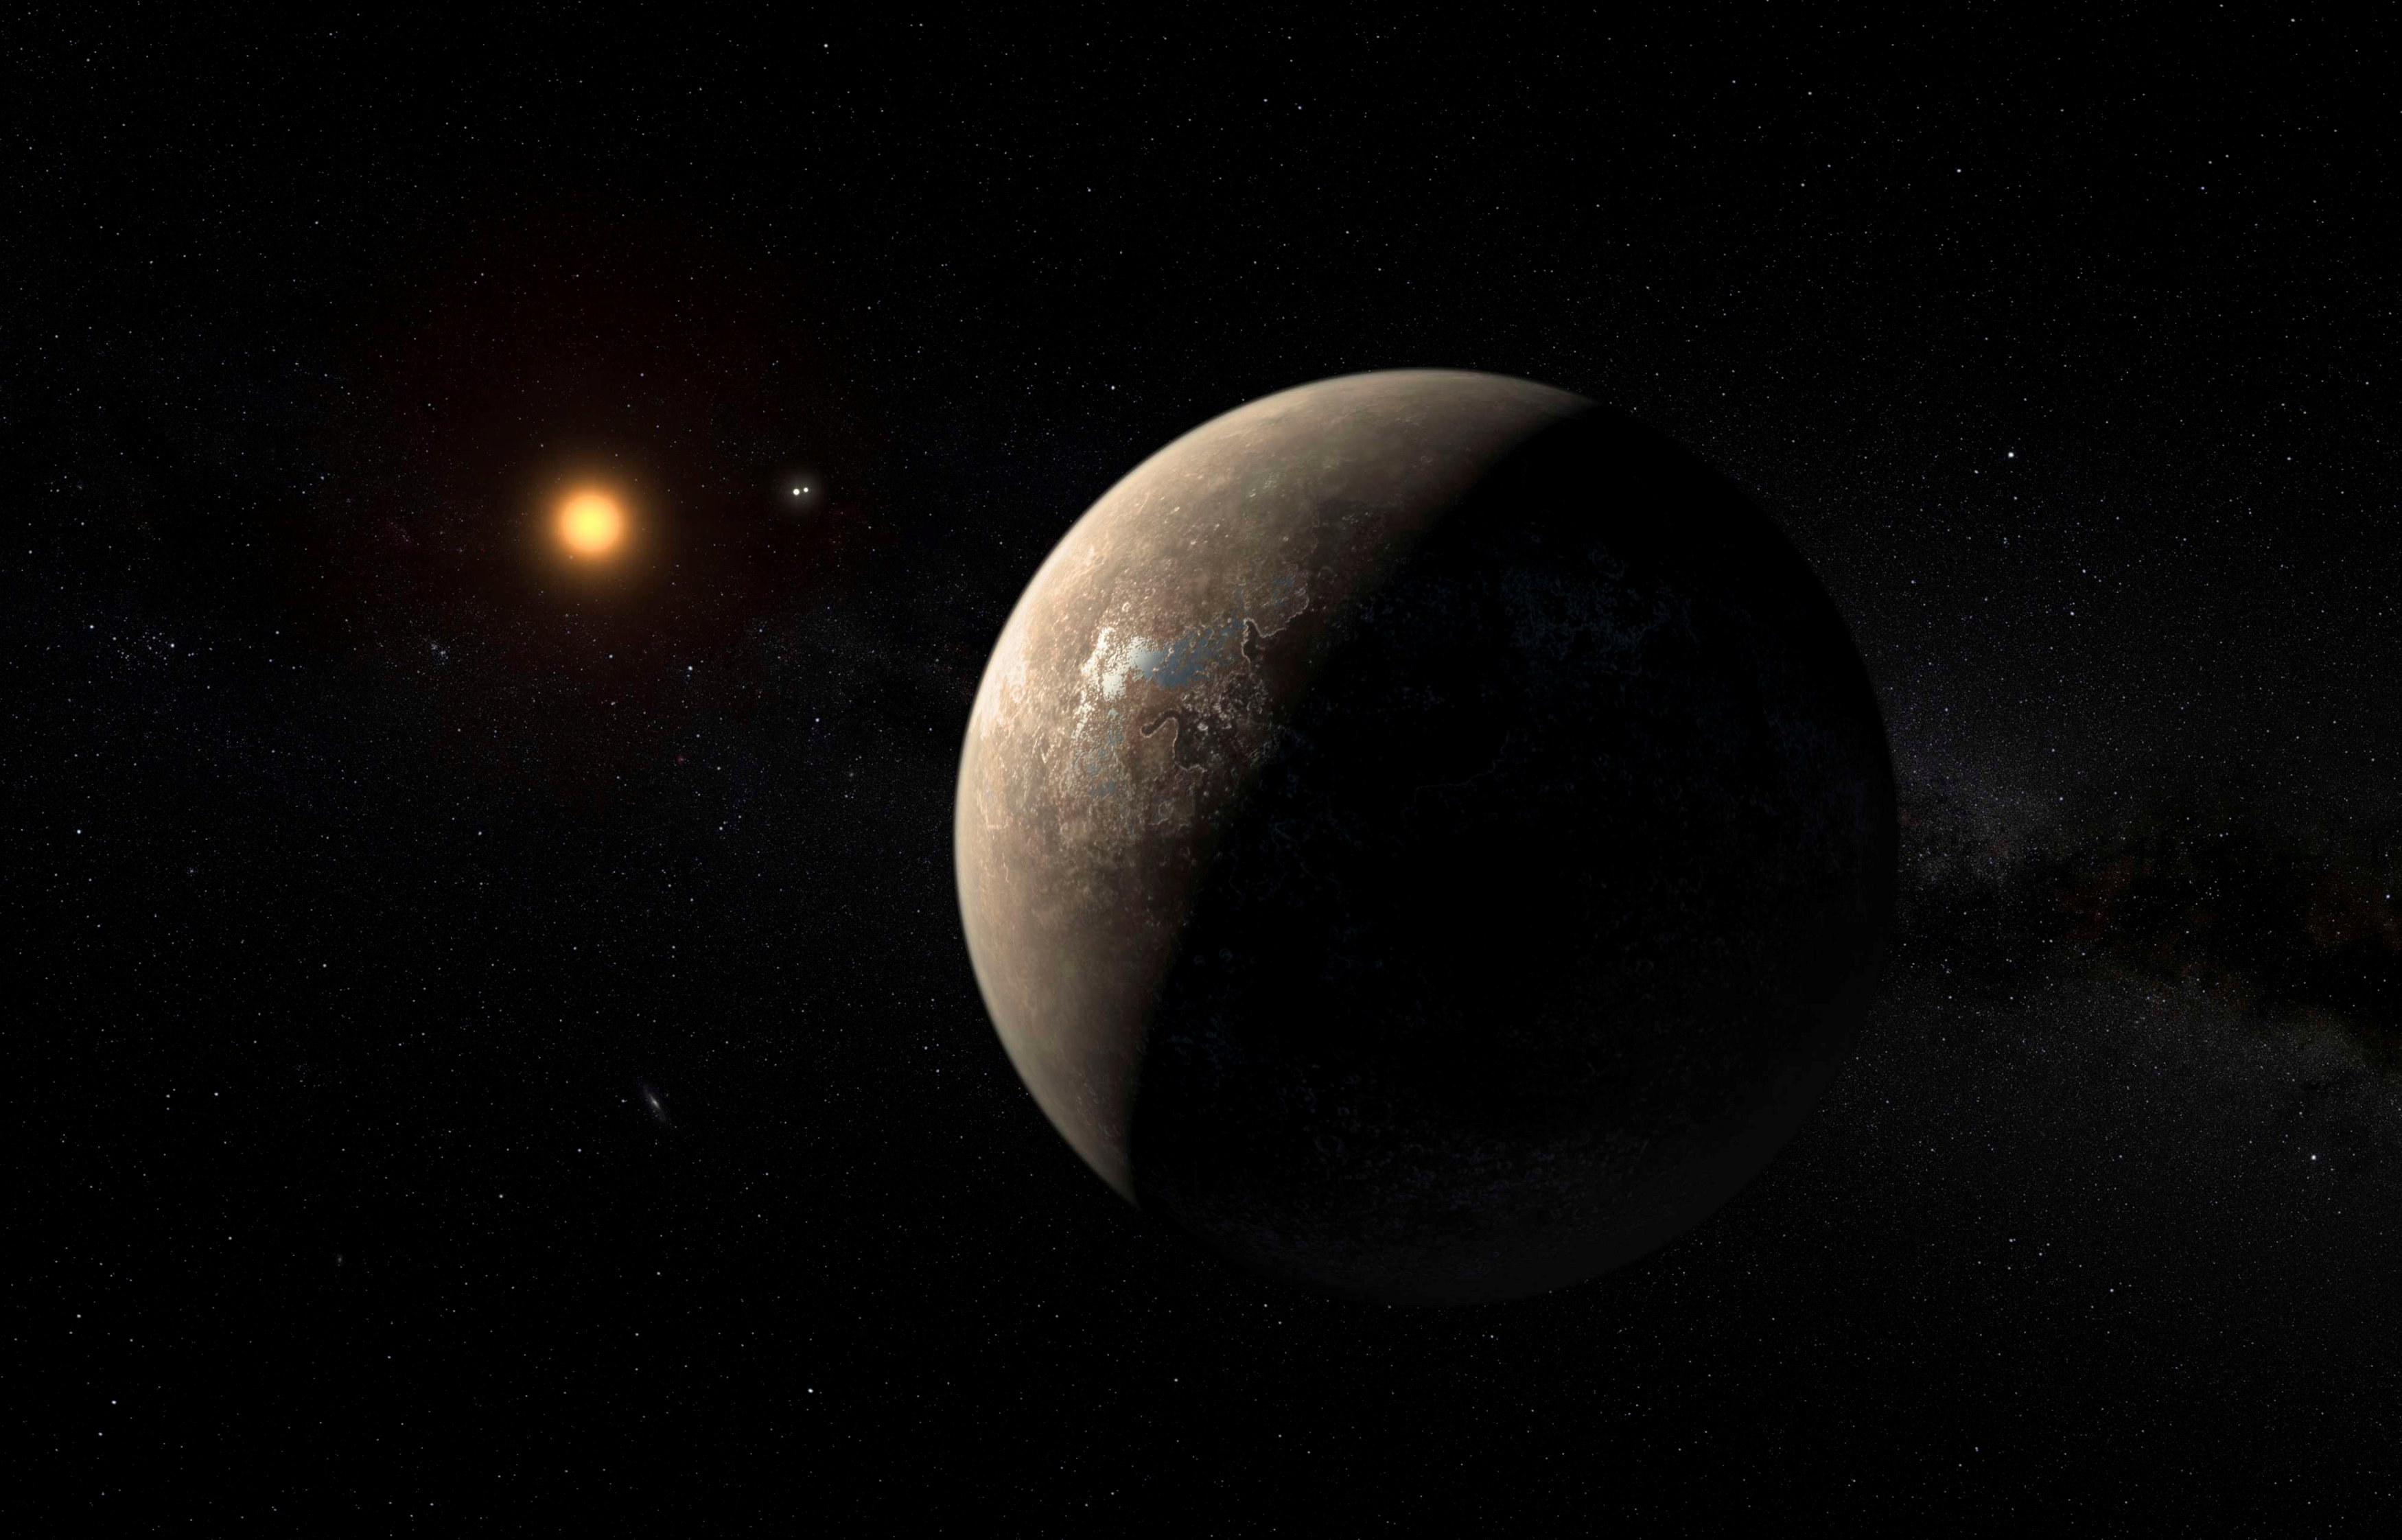 The planet Proxima b orbiting the red dwarf star Proxima Centauri, the closest star to our Solar System, is seen in an undated artist's impression released by the European Southern Observatory August 24, 2016. ESO/M. Kornmesser/Handout via Reuters THIS IM